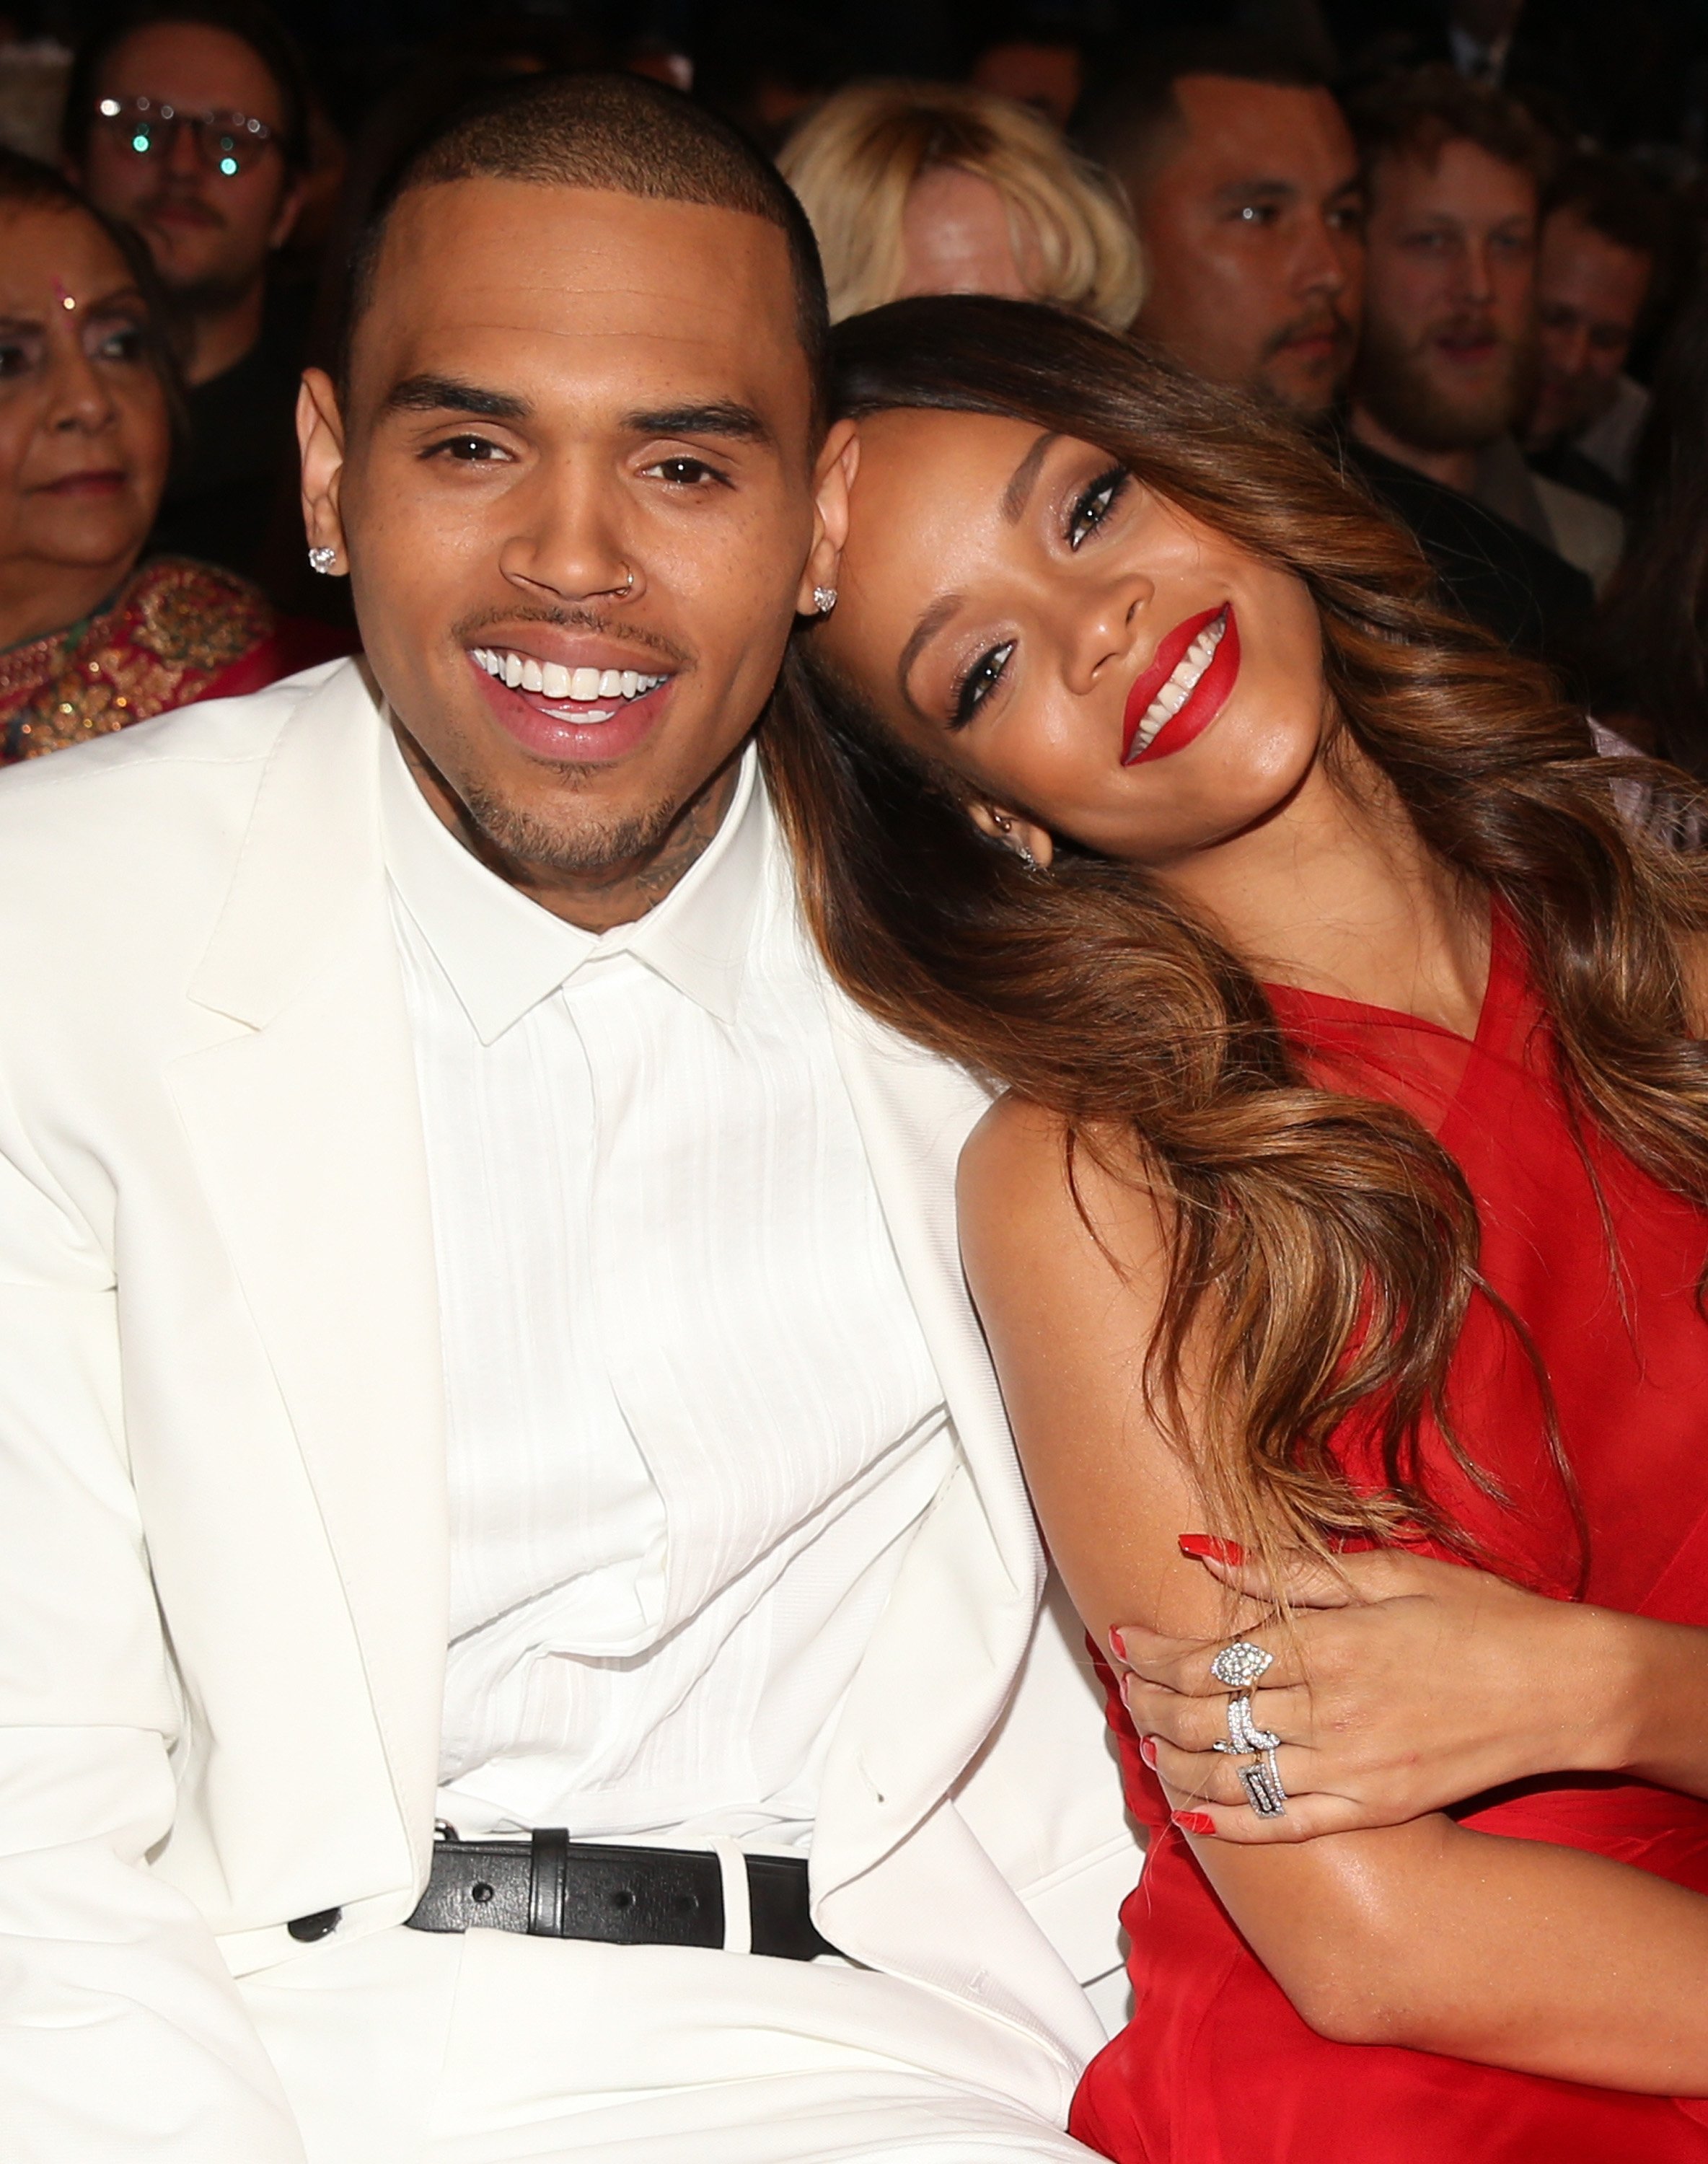  Chris Brown and Rihanna attend the 55th Annual GRAMMY Awards at STAPLES Center on February 10, 2013 | Photo: GettyImages